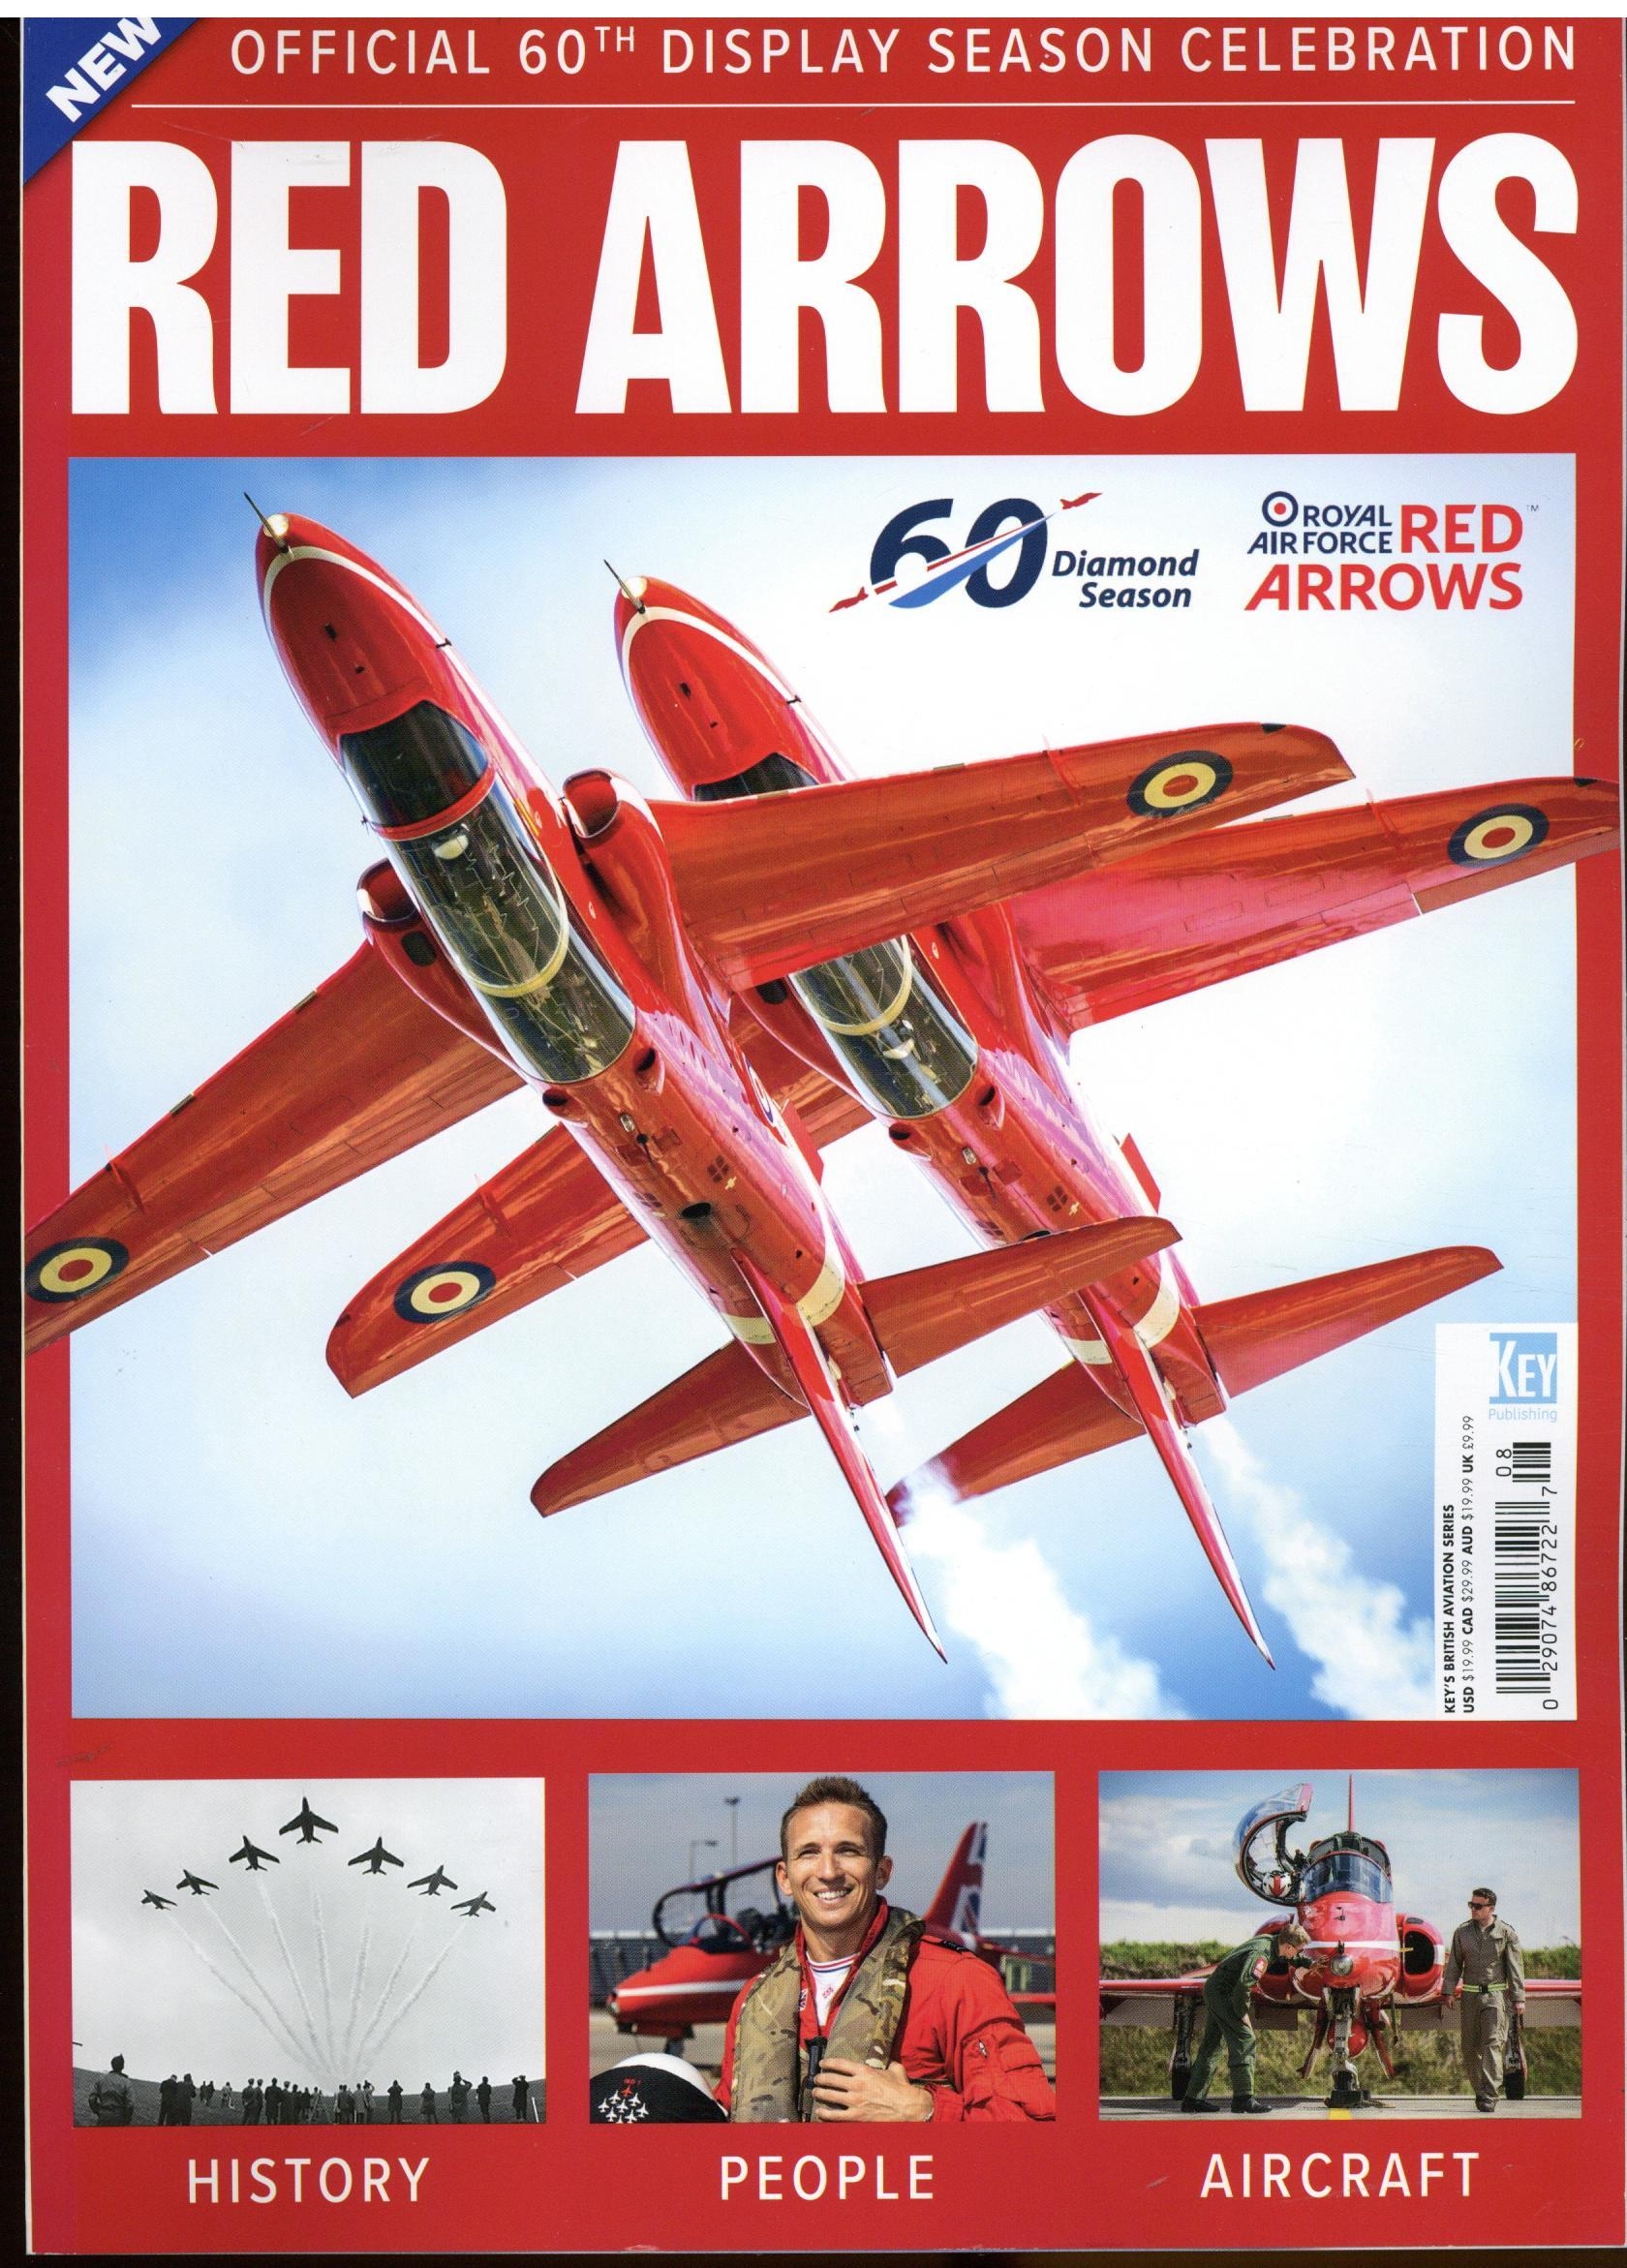 Red Arrows at 60